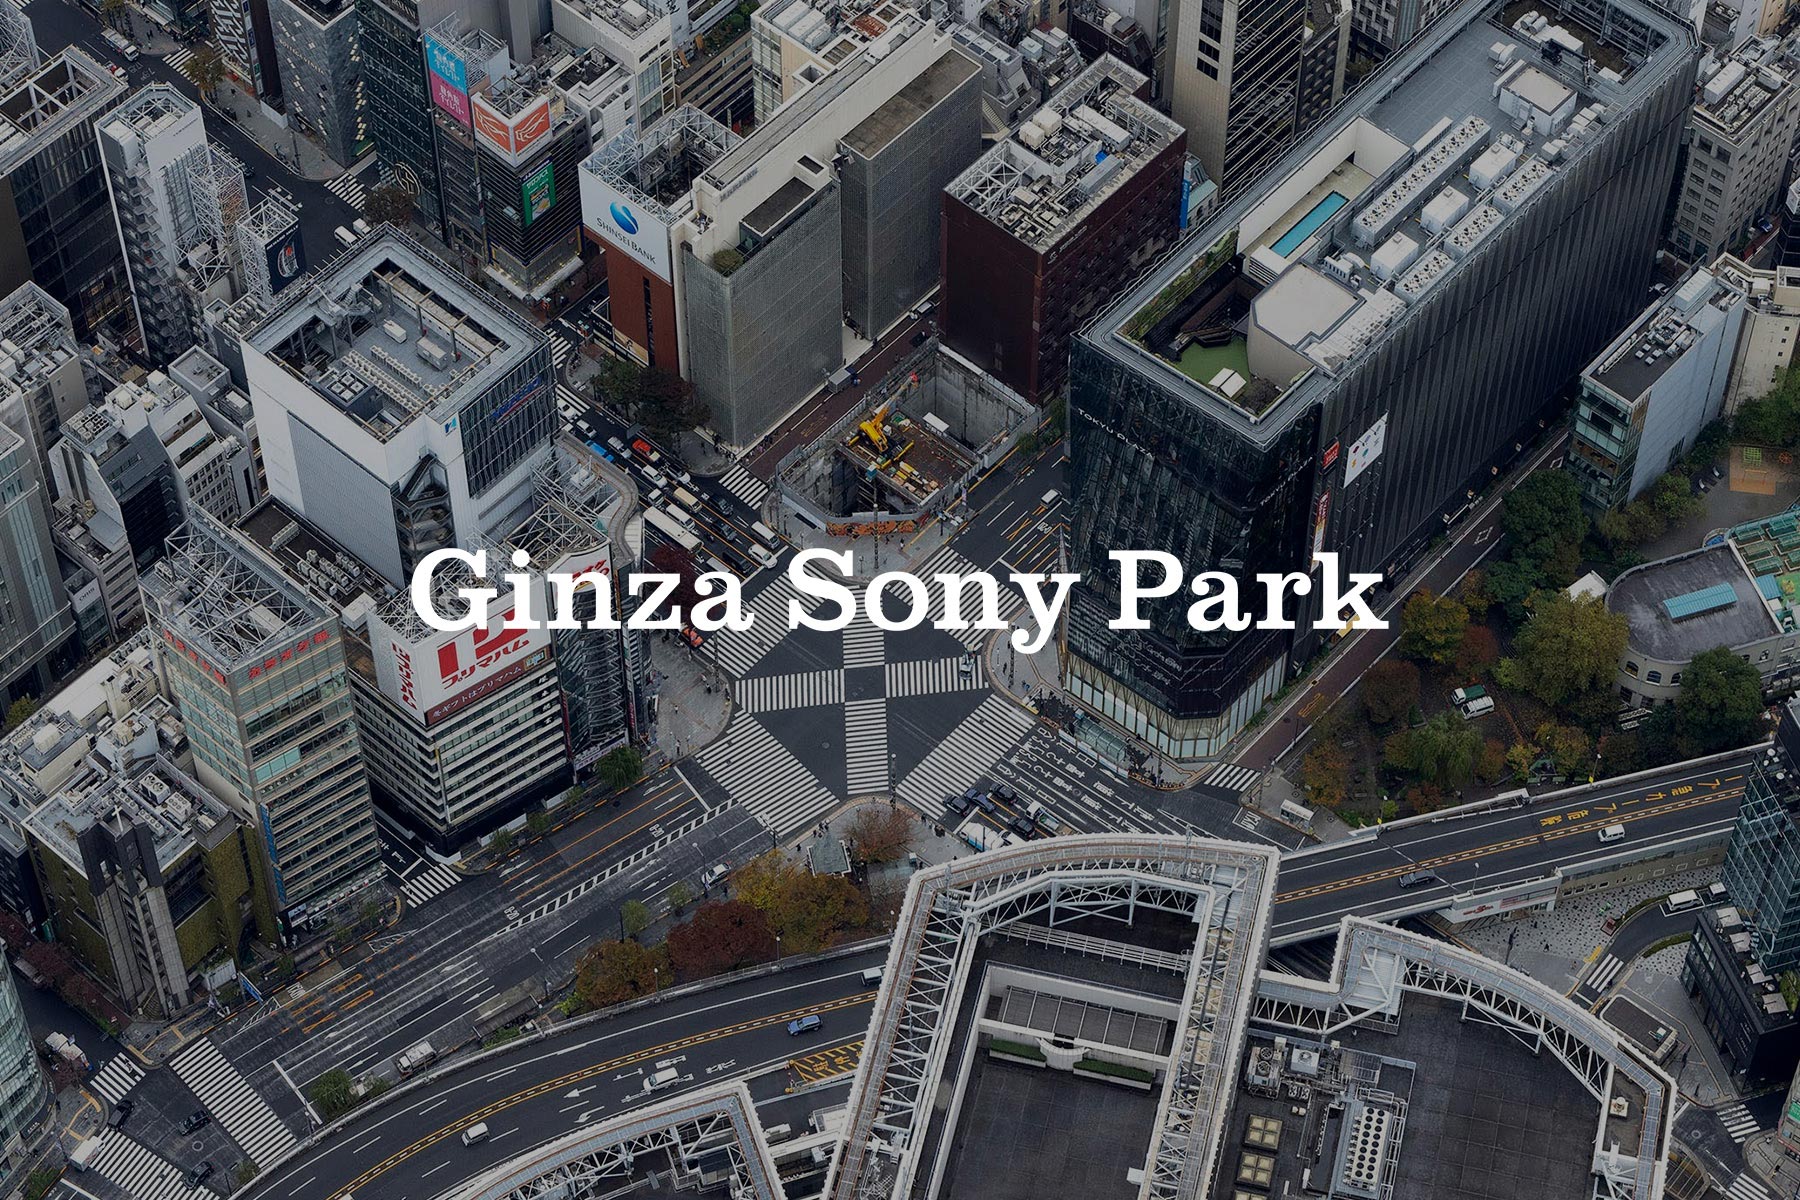 Bird's eye view of the Ginza Sony Park